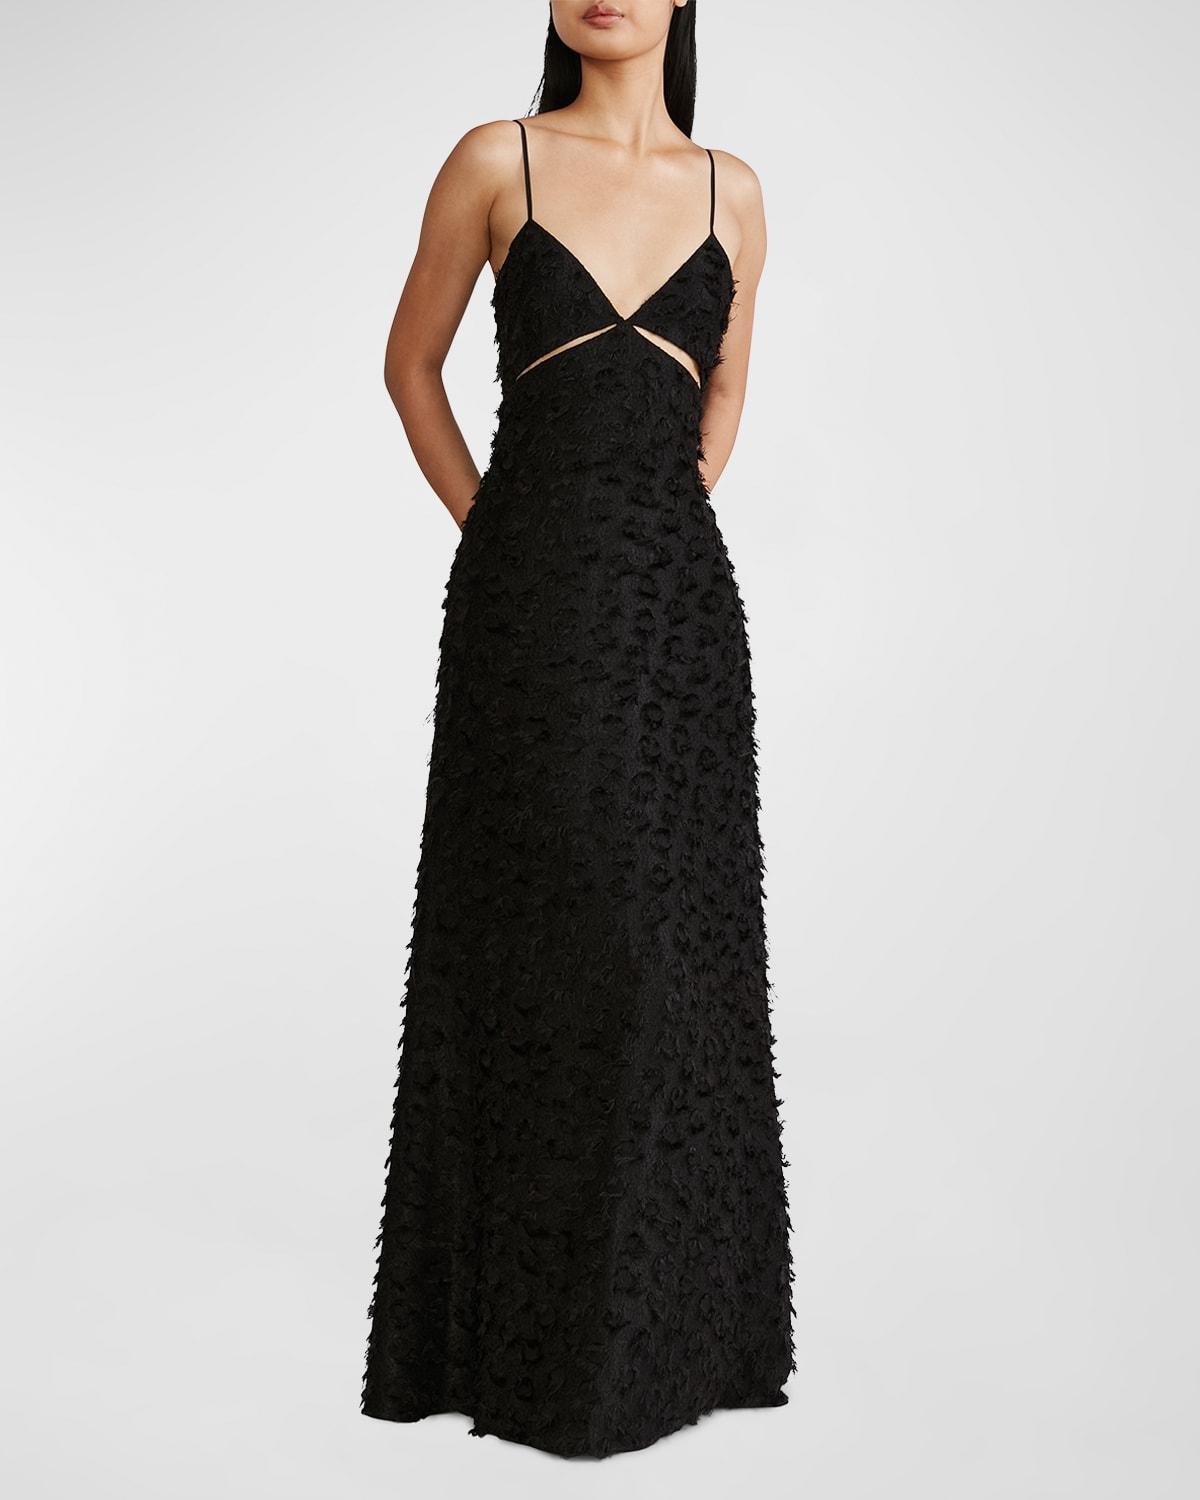 Alluring and affordable Truly Zac Posen Dresses  Davids Bridal Blog